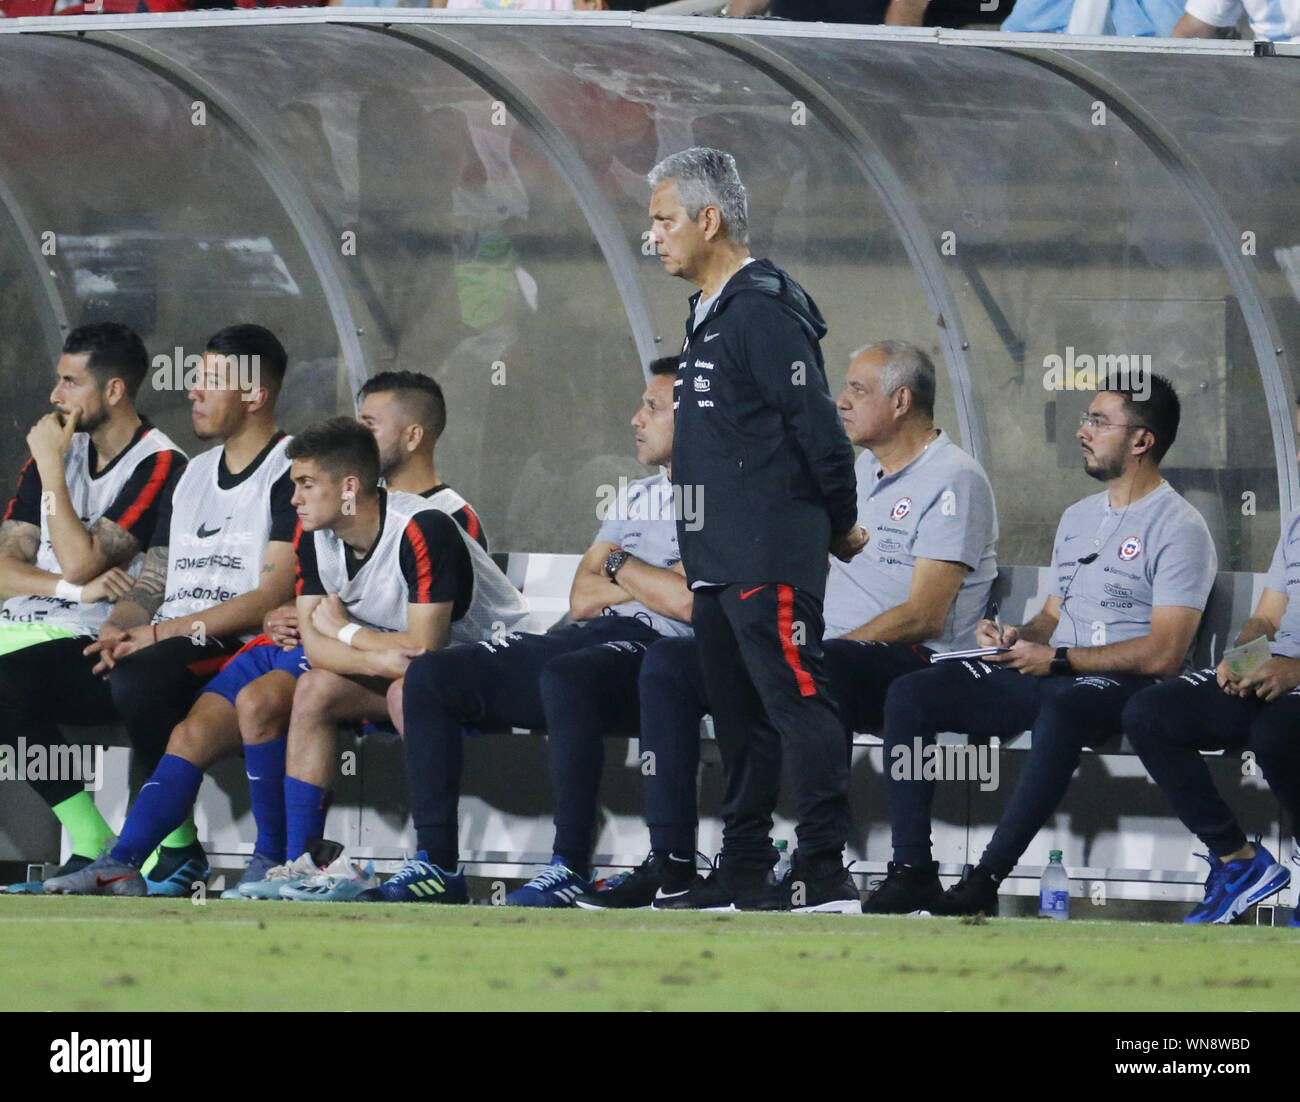 Los Angeles, California, USA. 5th Sep, 2019. Chile head coach Reinaldo Rueda in an International Friendly Soccer match between Argentina and Chile at the Los Angeles Memorial Coliseum in Los Angeles on Thursday, September 5, 2019. Credit: Ringo Chiu/ZUMA Wire/Alamy Live News Stock Photo